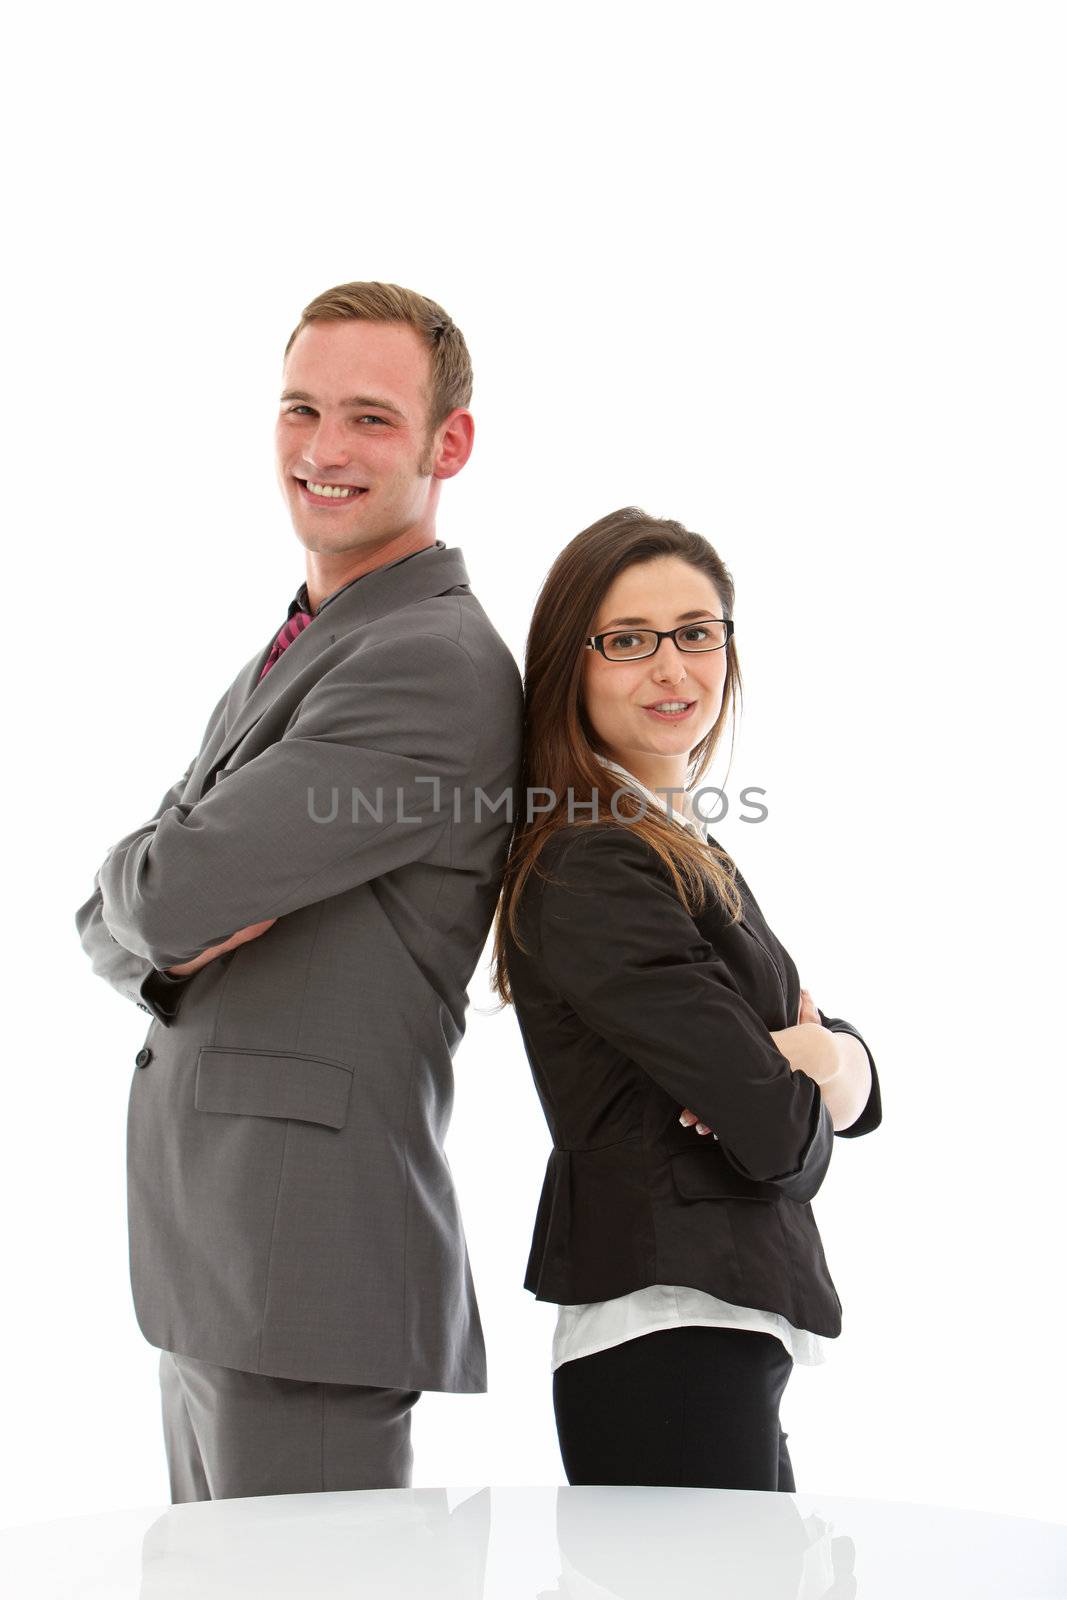 Smiling man and woman in suits standing back to back on white background